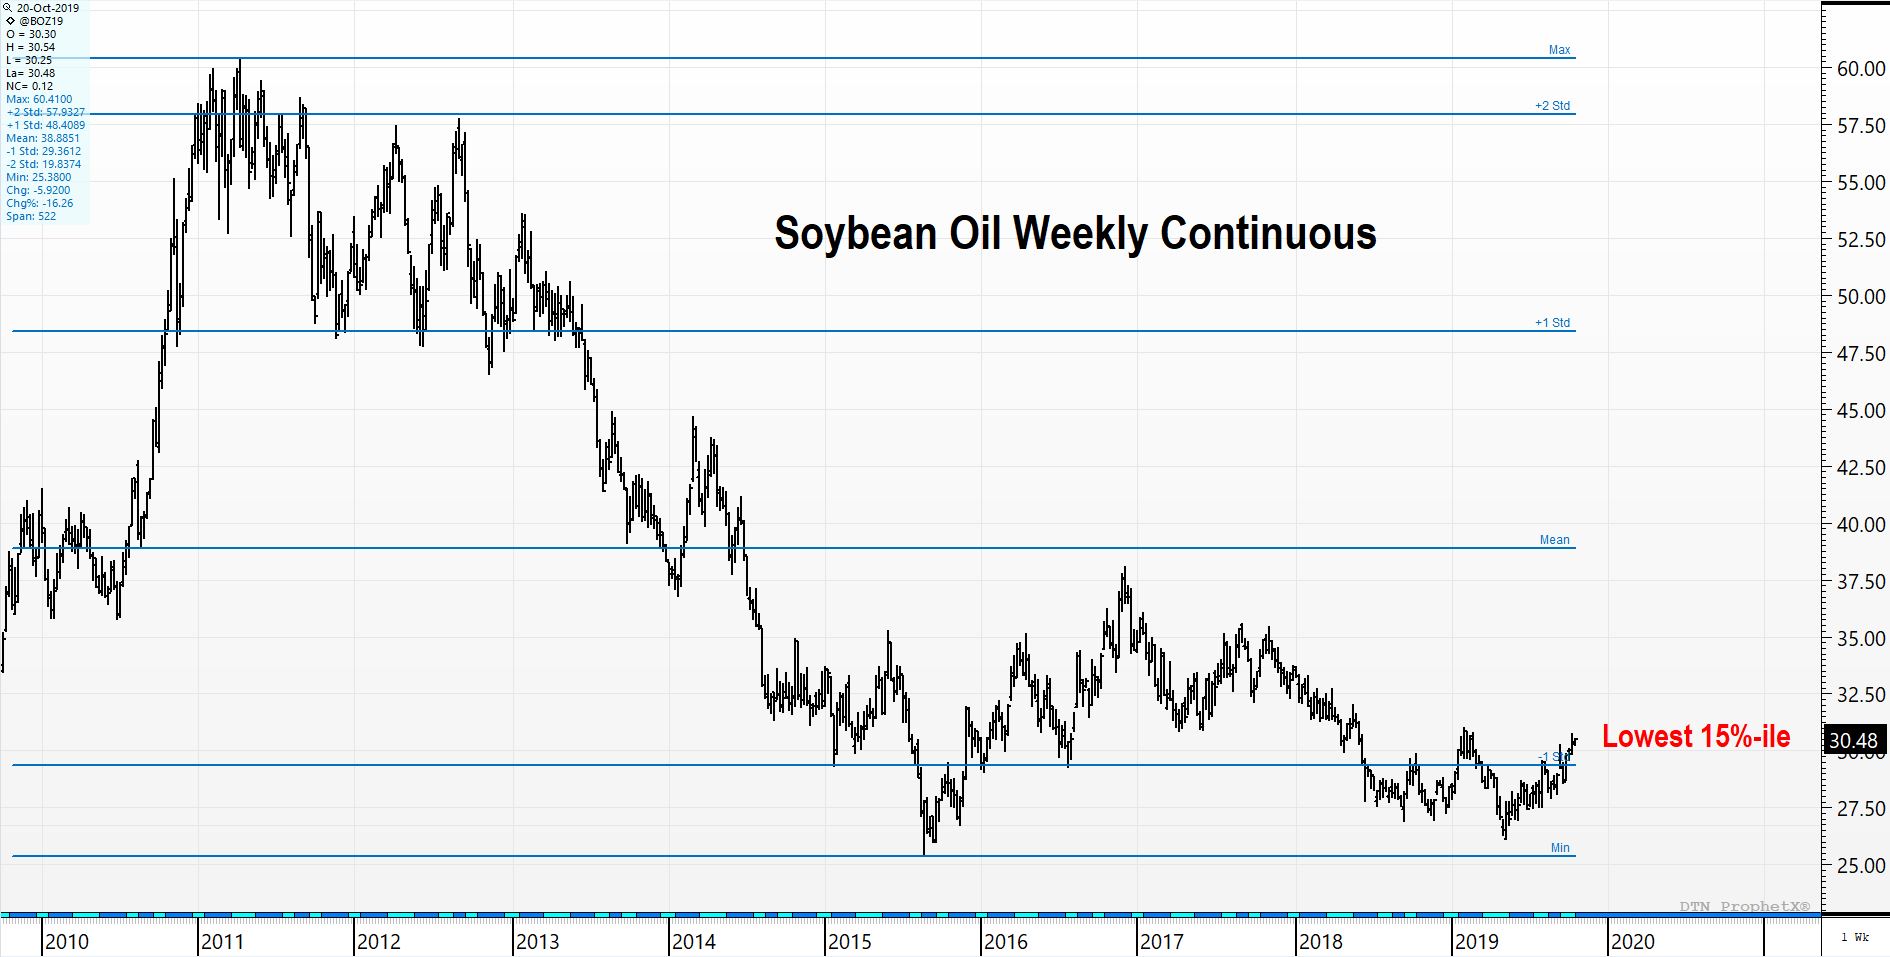 Soybean Oil Futures Continuous Weekly Chart